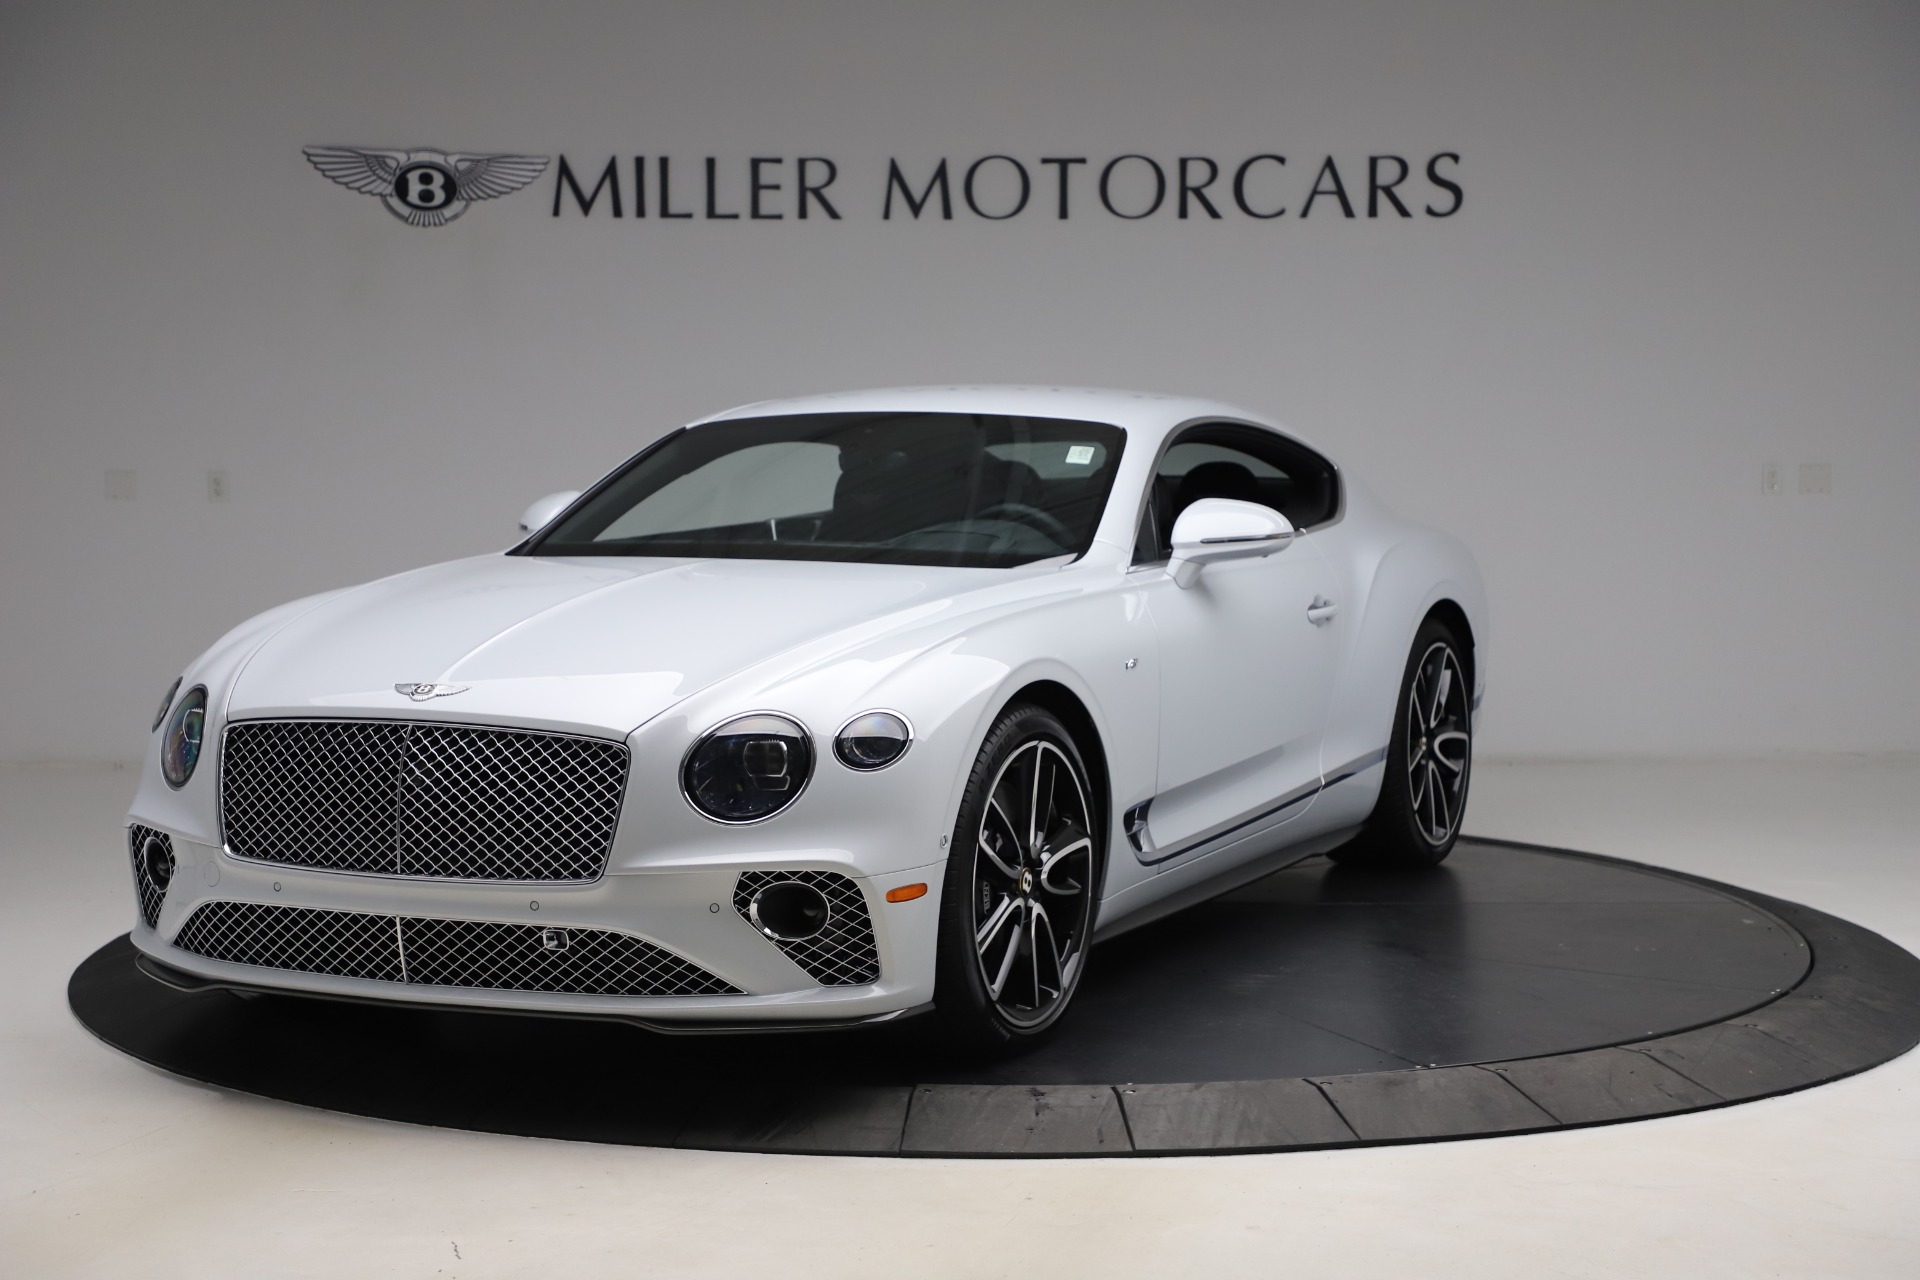 New 2020 Bentley Continental GT V8 for sale Sold at Rolls-Royce Motor Cars Greenwich in Greenwich CT 06830 1